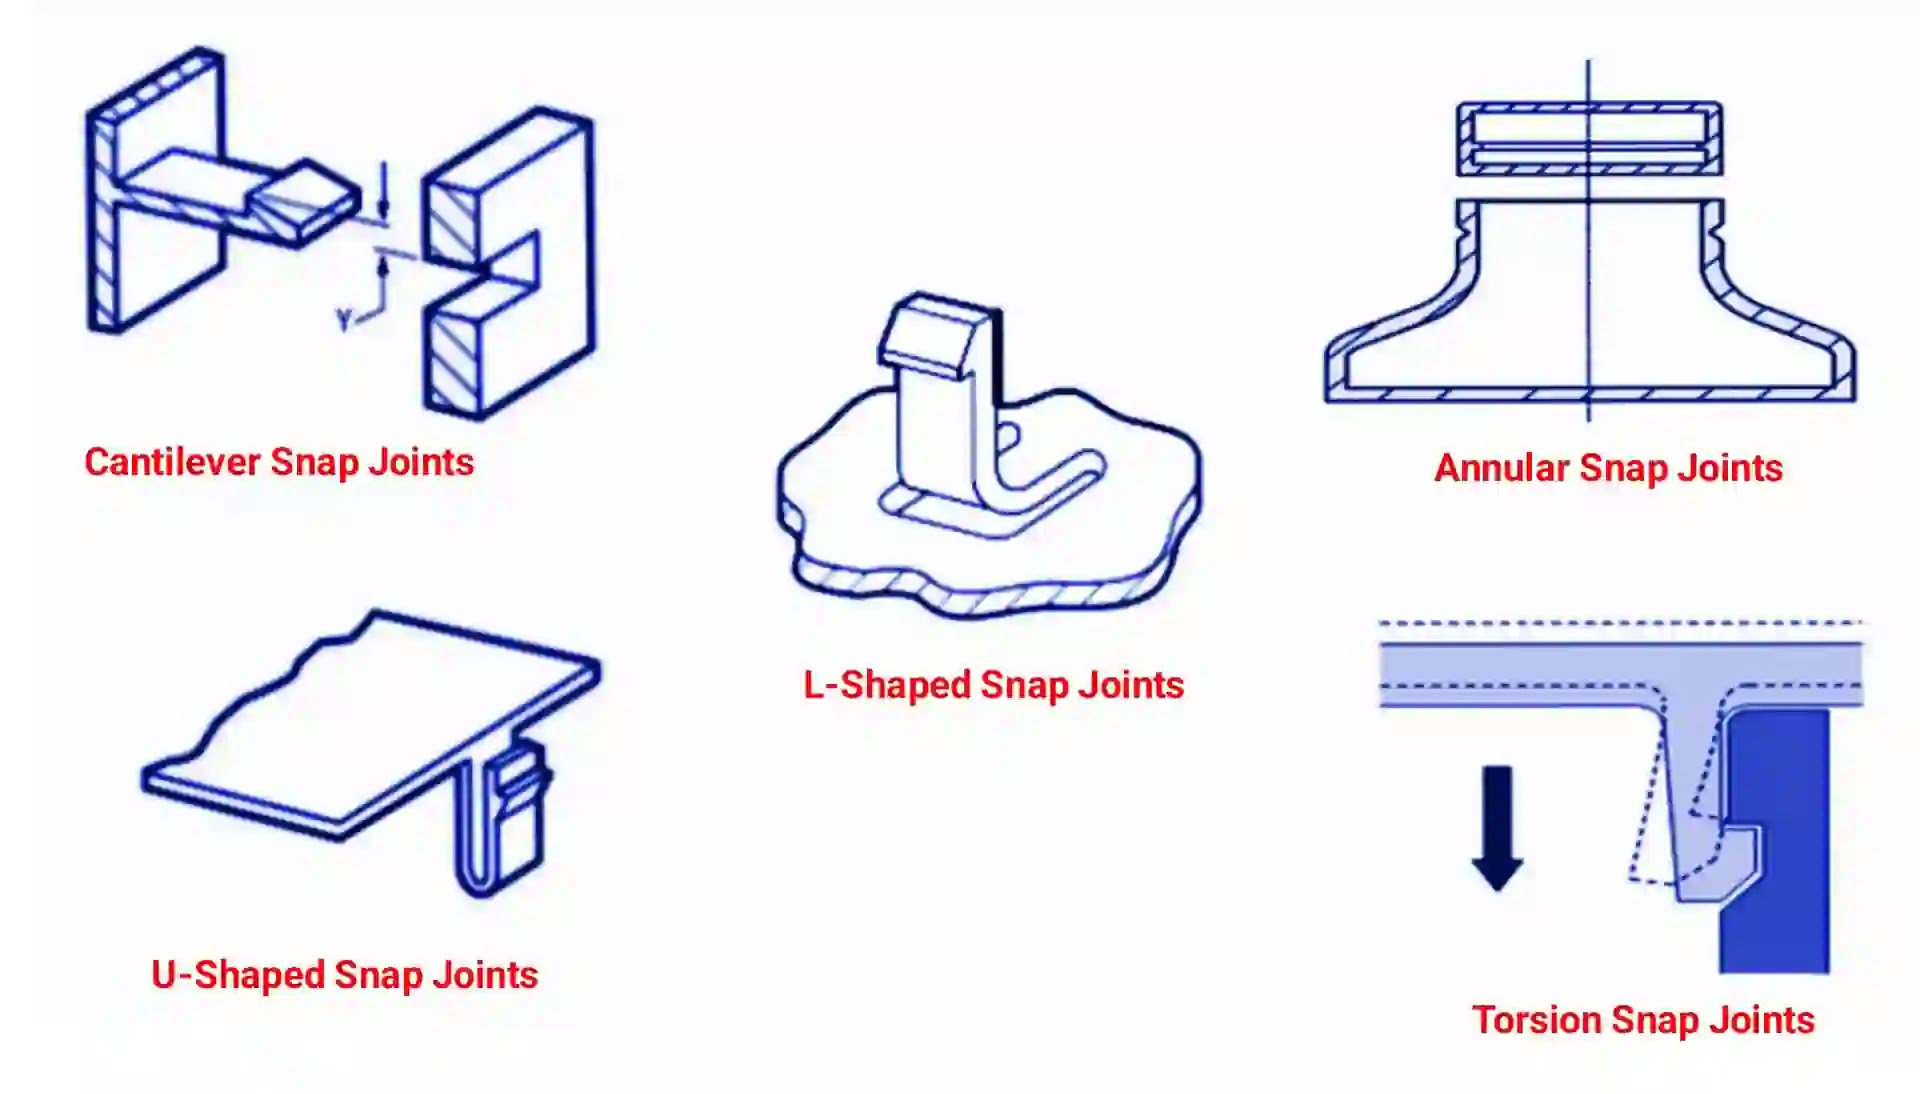 Annular Snap Joints: Applications And Design Considerations - Unity ...